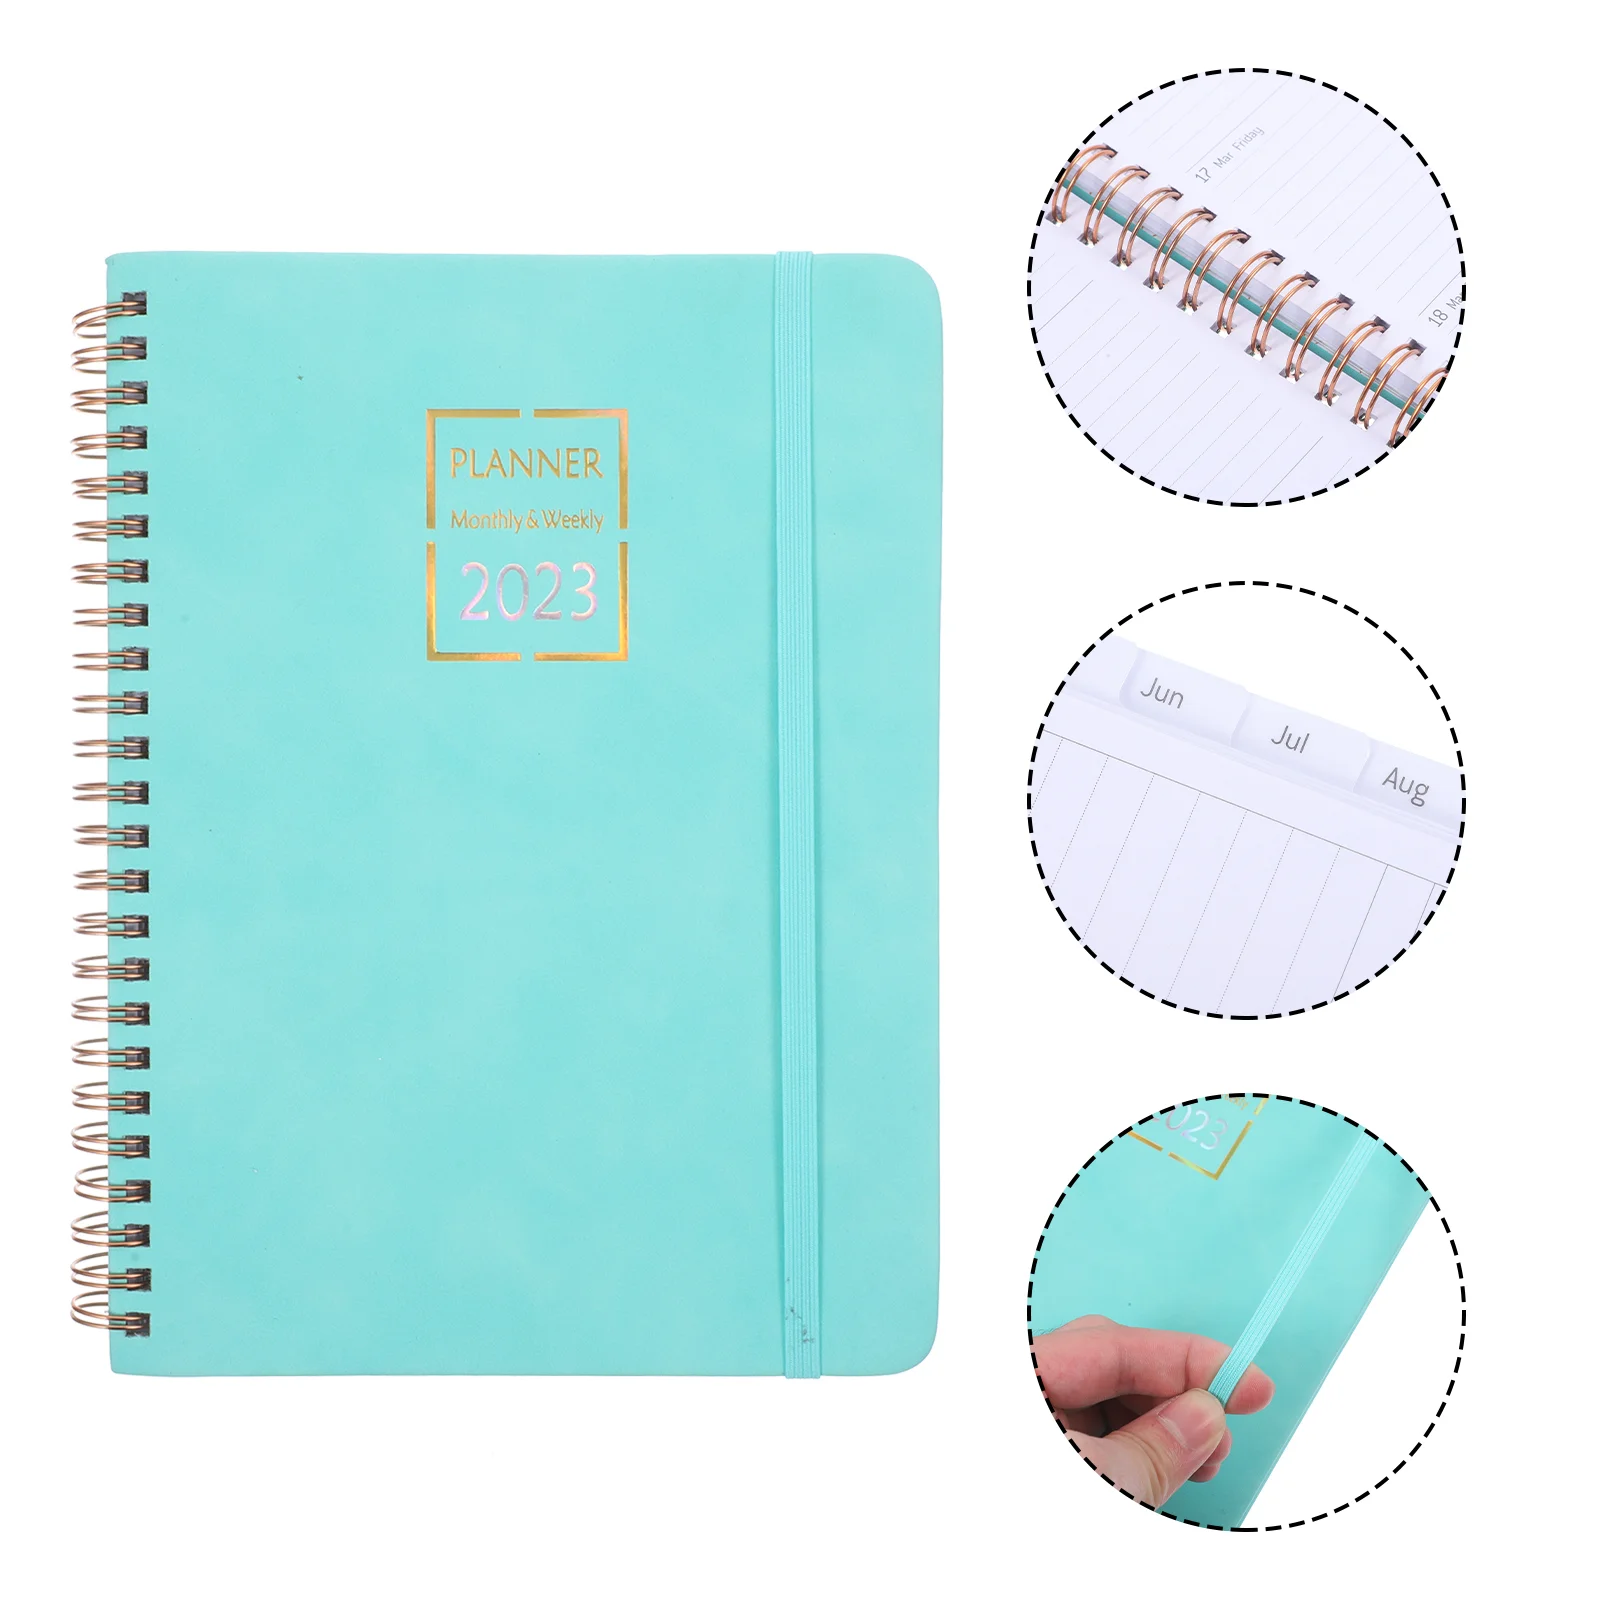 

Planner Notepad Notebook Diary Notepads List Schedule Weekly Calendar Planning Day View Do Daily Monthly Students Coil Book